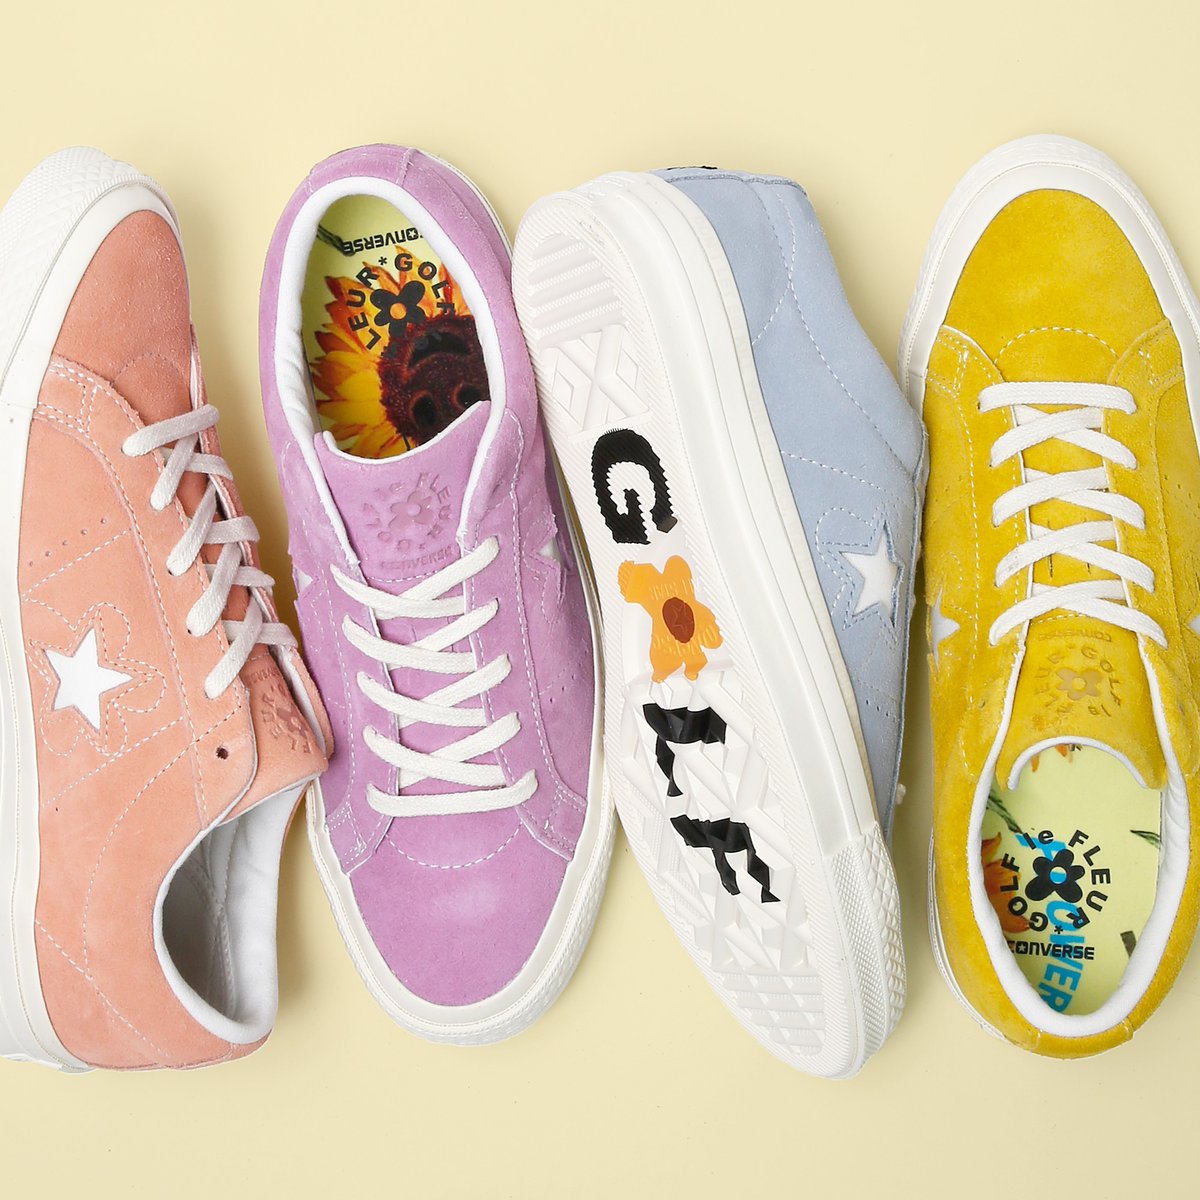 Tyler The Creator Set To Collaborate With Converse On A New Sneaker1200 x 1200